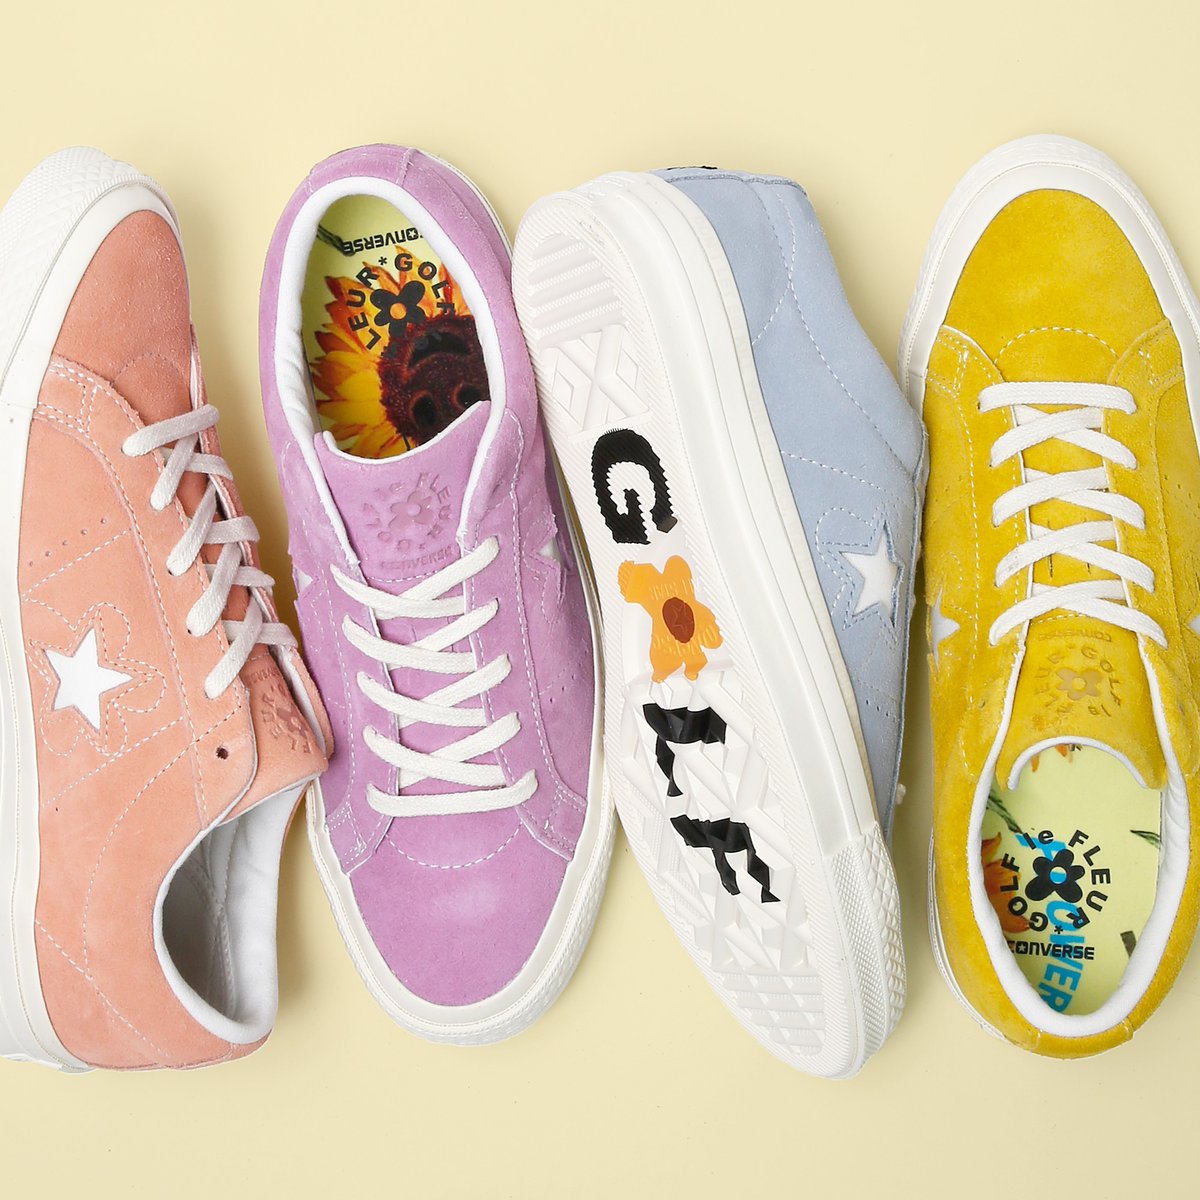 Tyler The Creator Set To Collaborate With Converse On A New Sneaker1200 x 1200